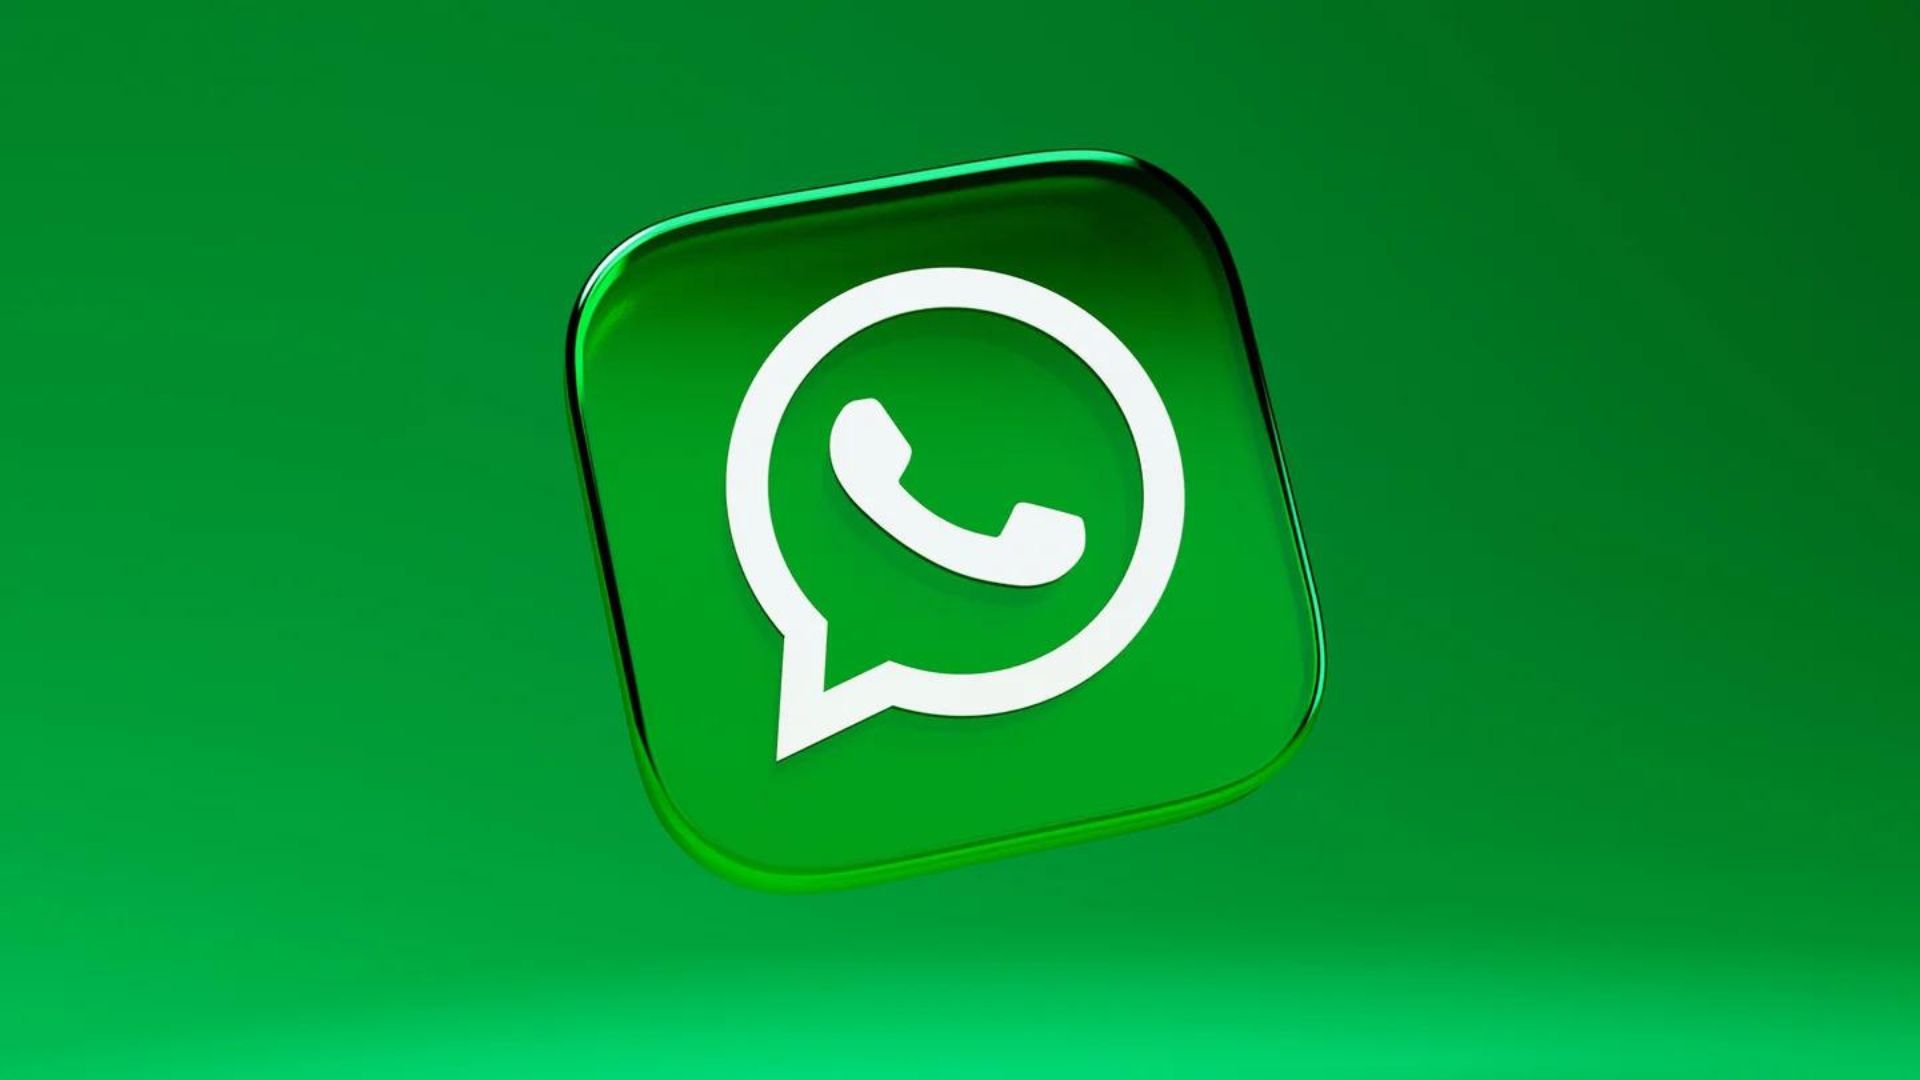 Whatsapp’s New Interface: All You Need to Know